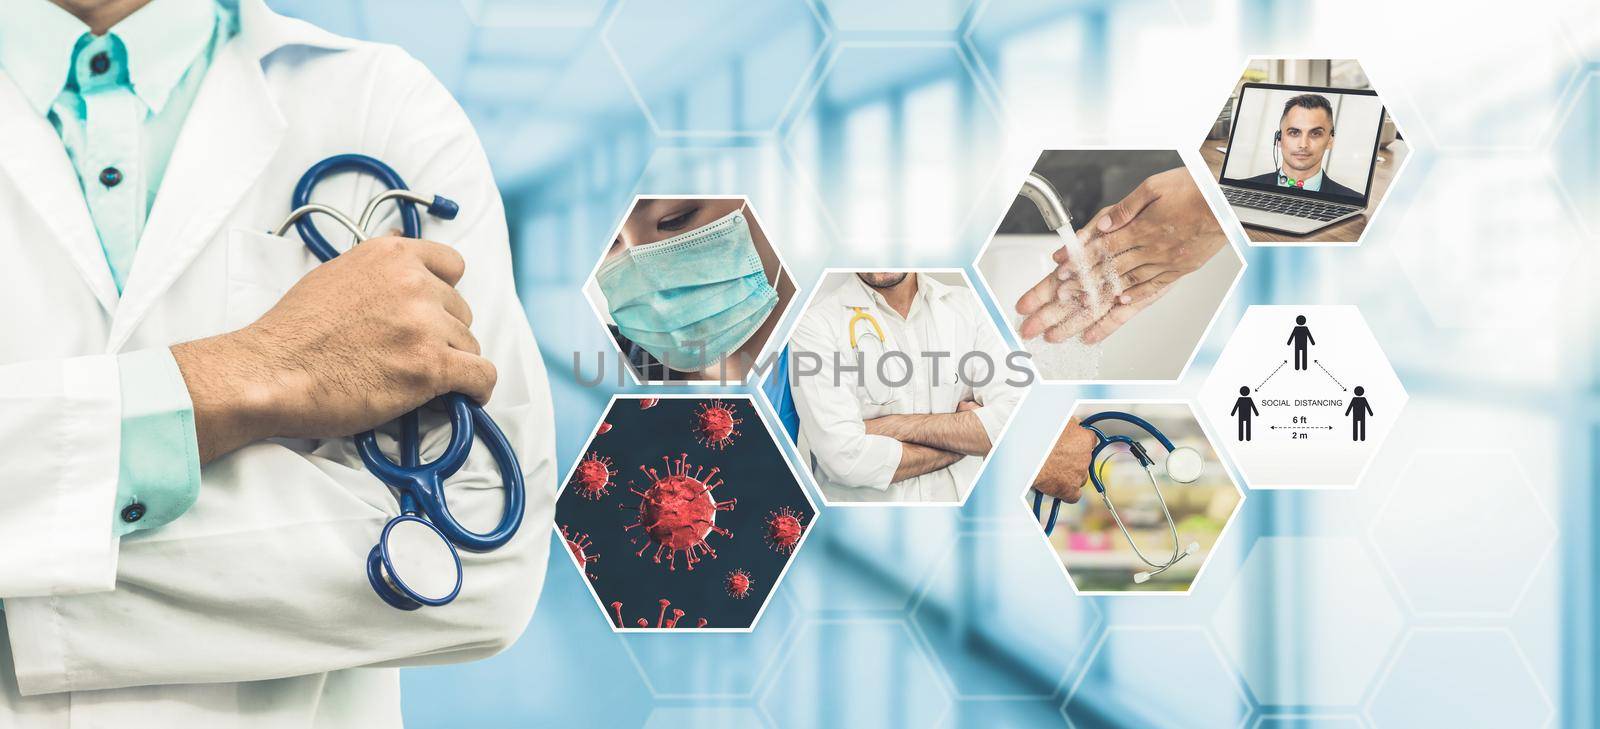 Coronavirus COVID-19 image set banner in concept of prevention information including safety precaution and doctor service to prevent spreading infection of covid-19 or 2019 Coronavirus Disease.